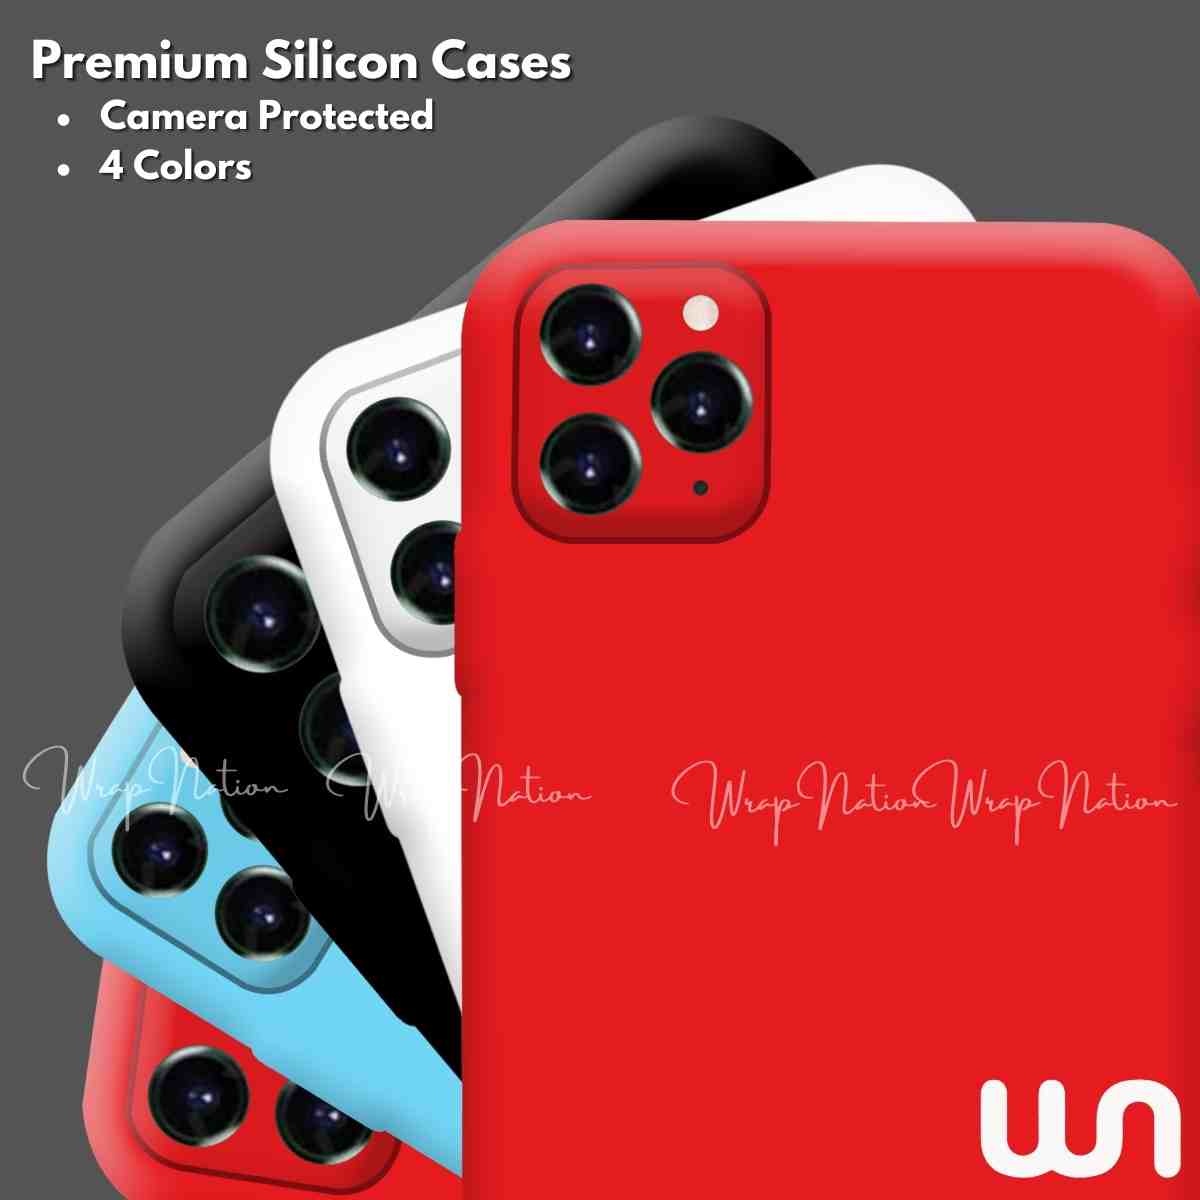 Color Silicon Cases with for Iphone 6 se.7.8